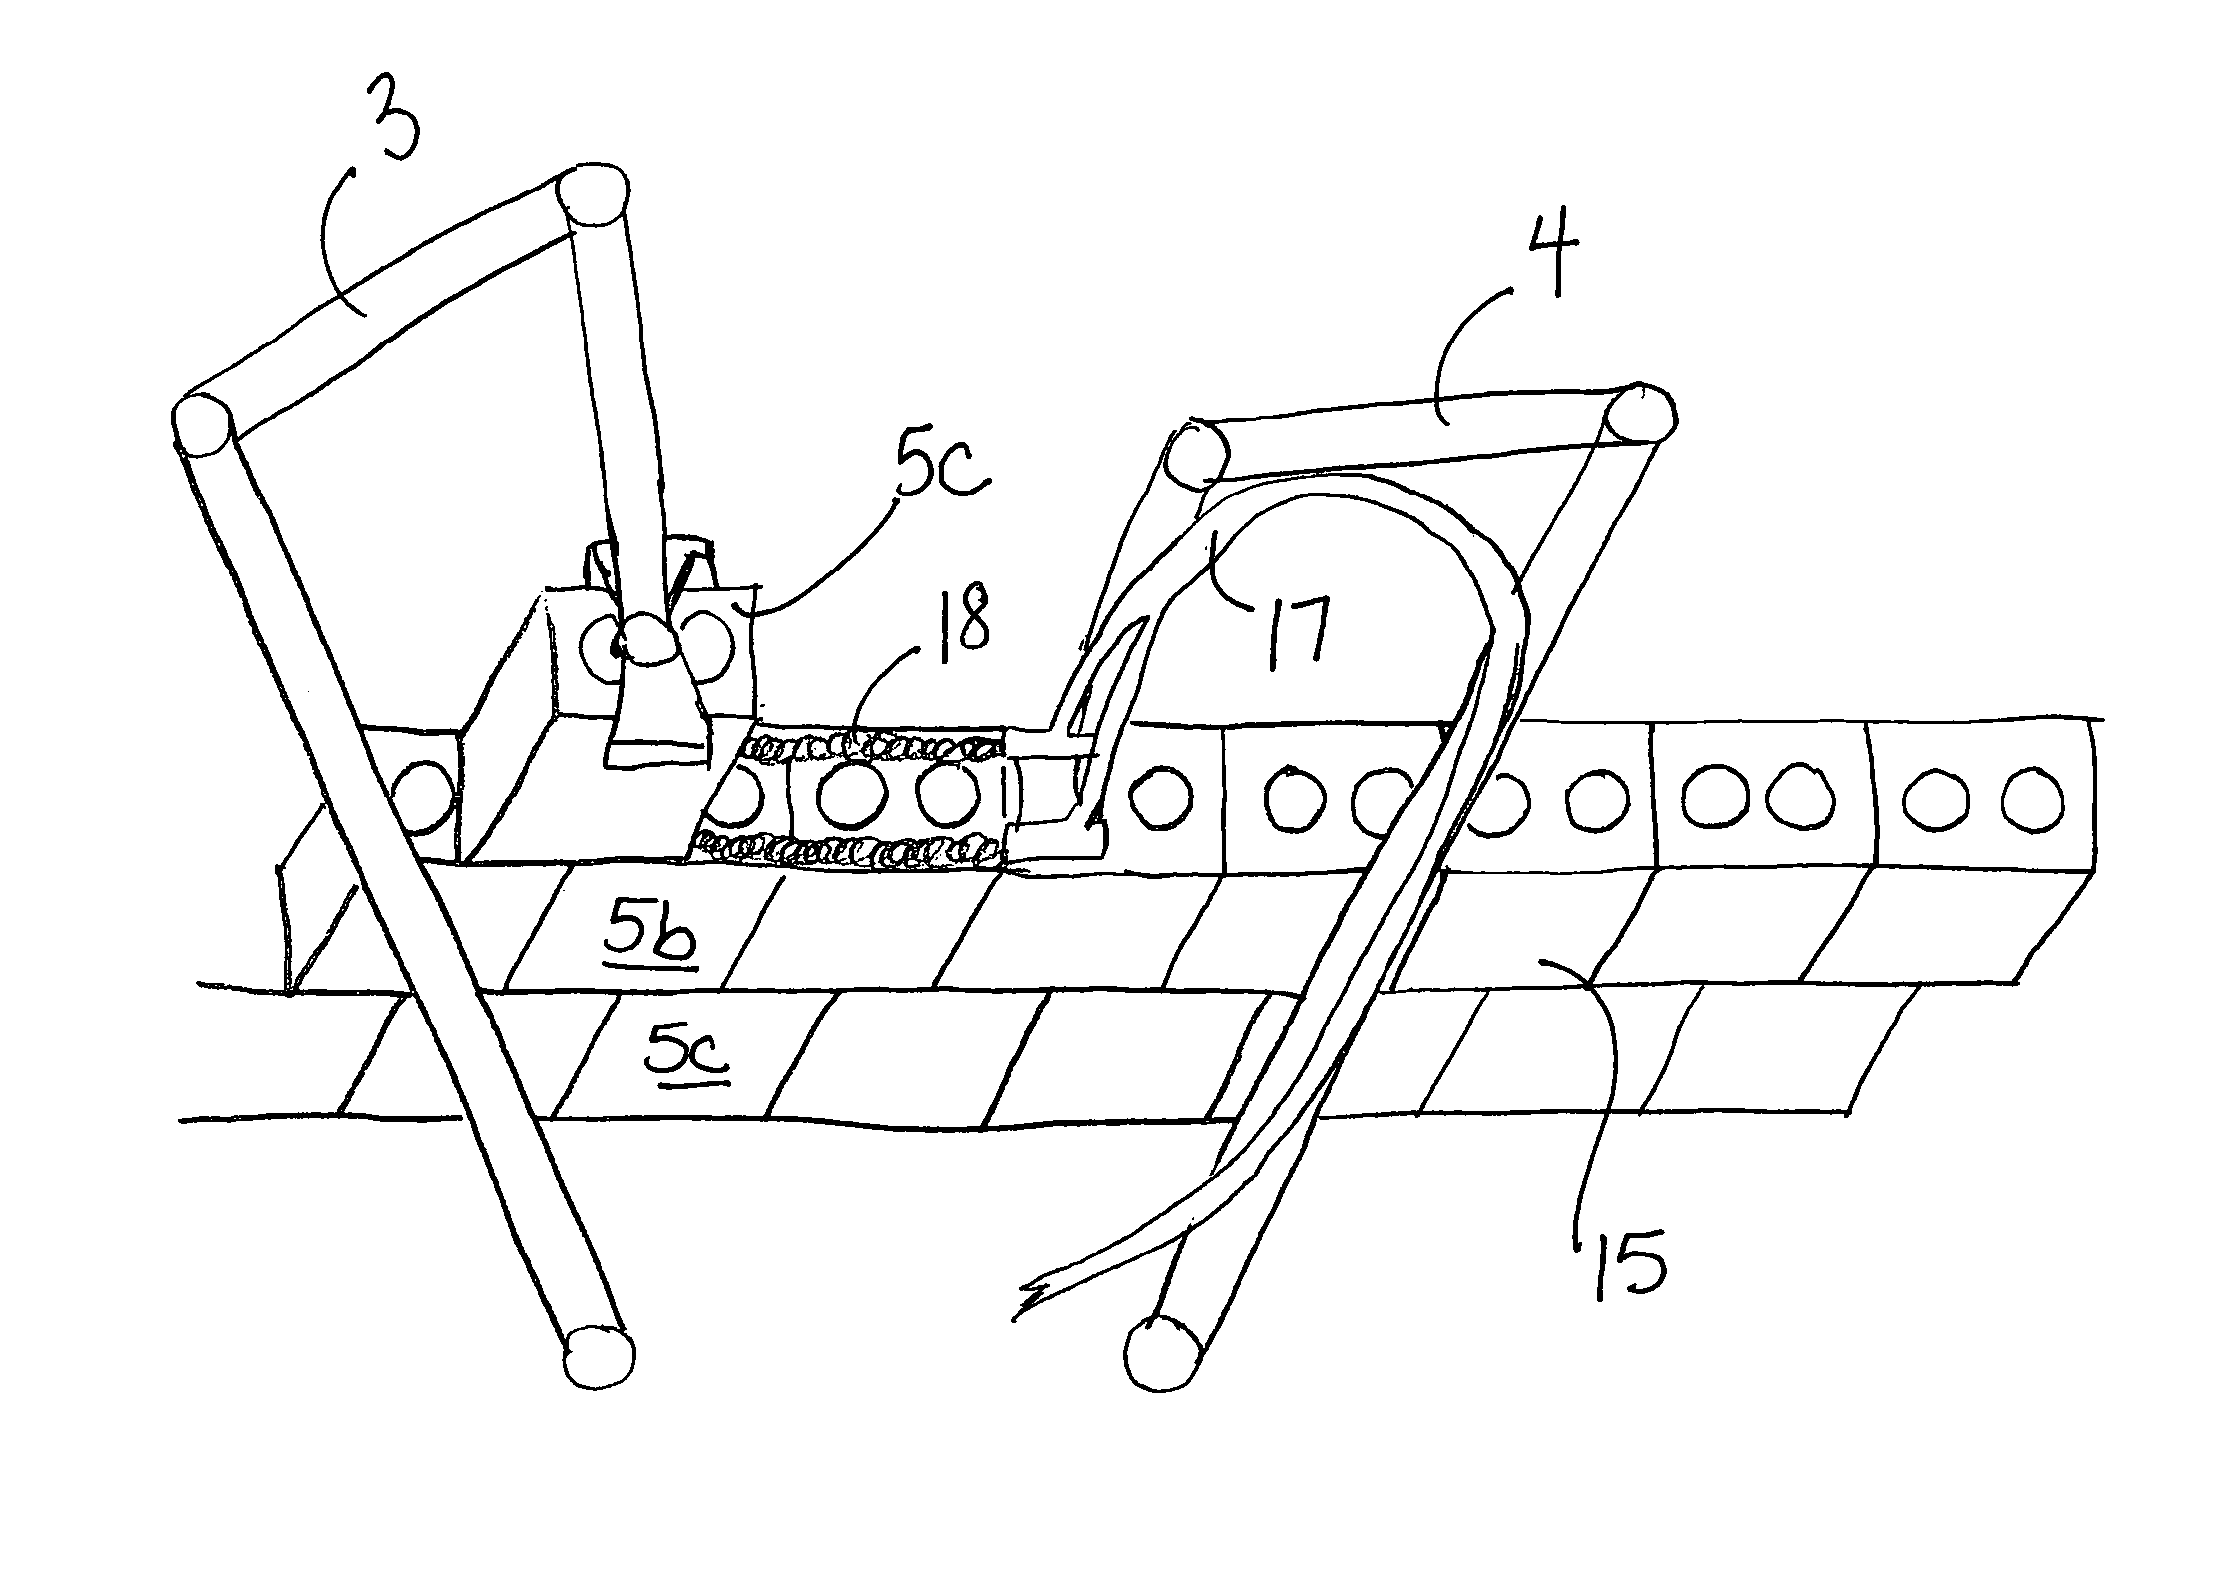 Automated construction machinery and method